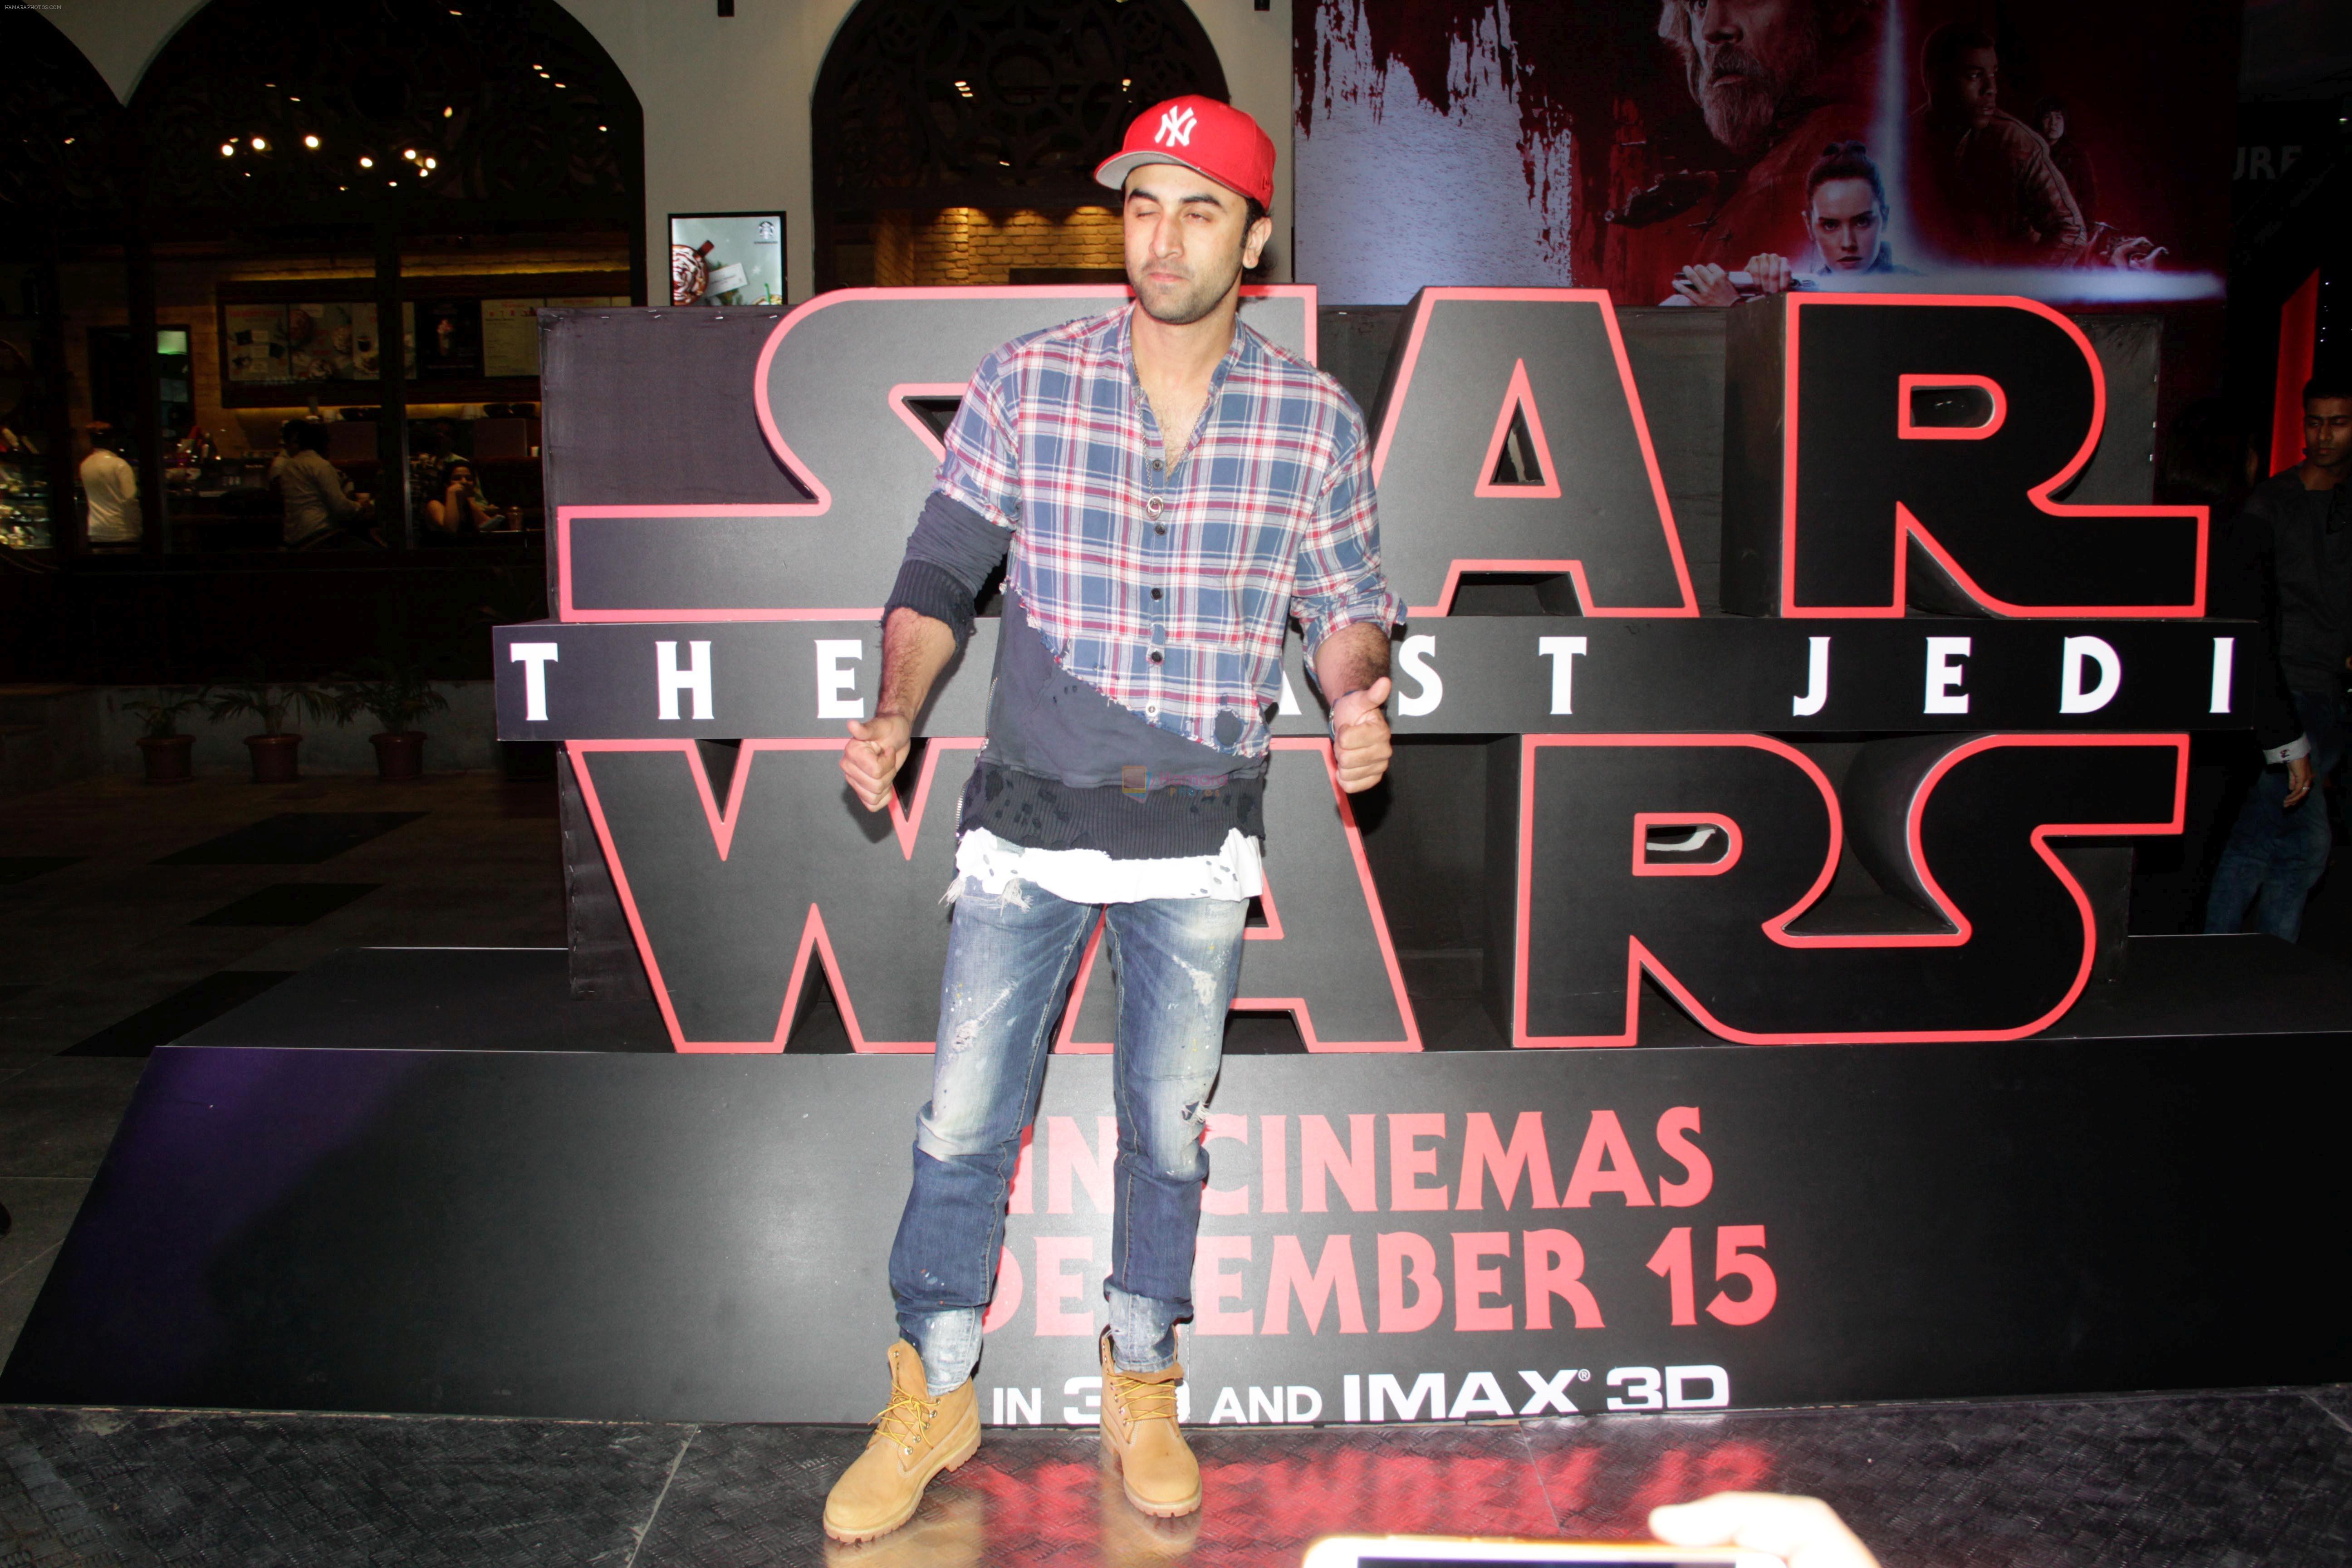 Ranbir Kapoor at the Red Carpet Premiere Of 2017's Most Awaited Hollywood Film Disney Star War on 13th Dec 2017